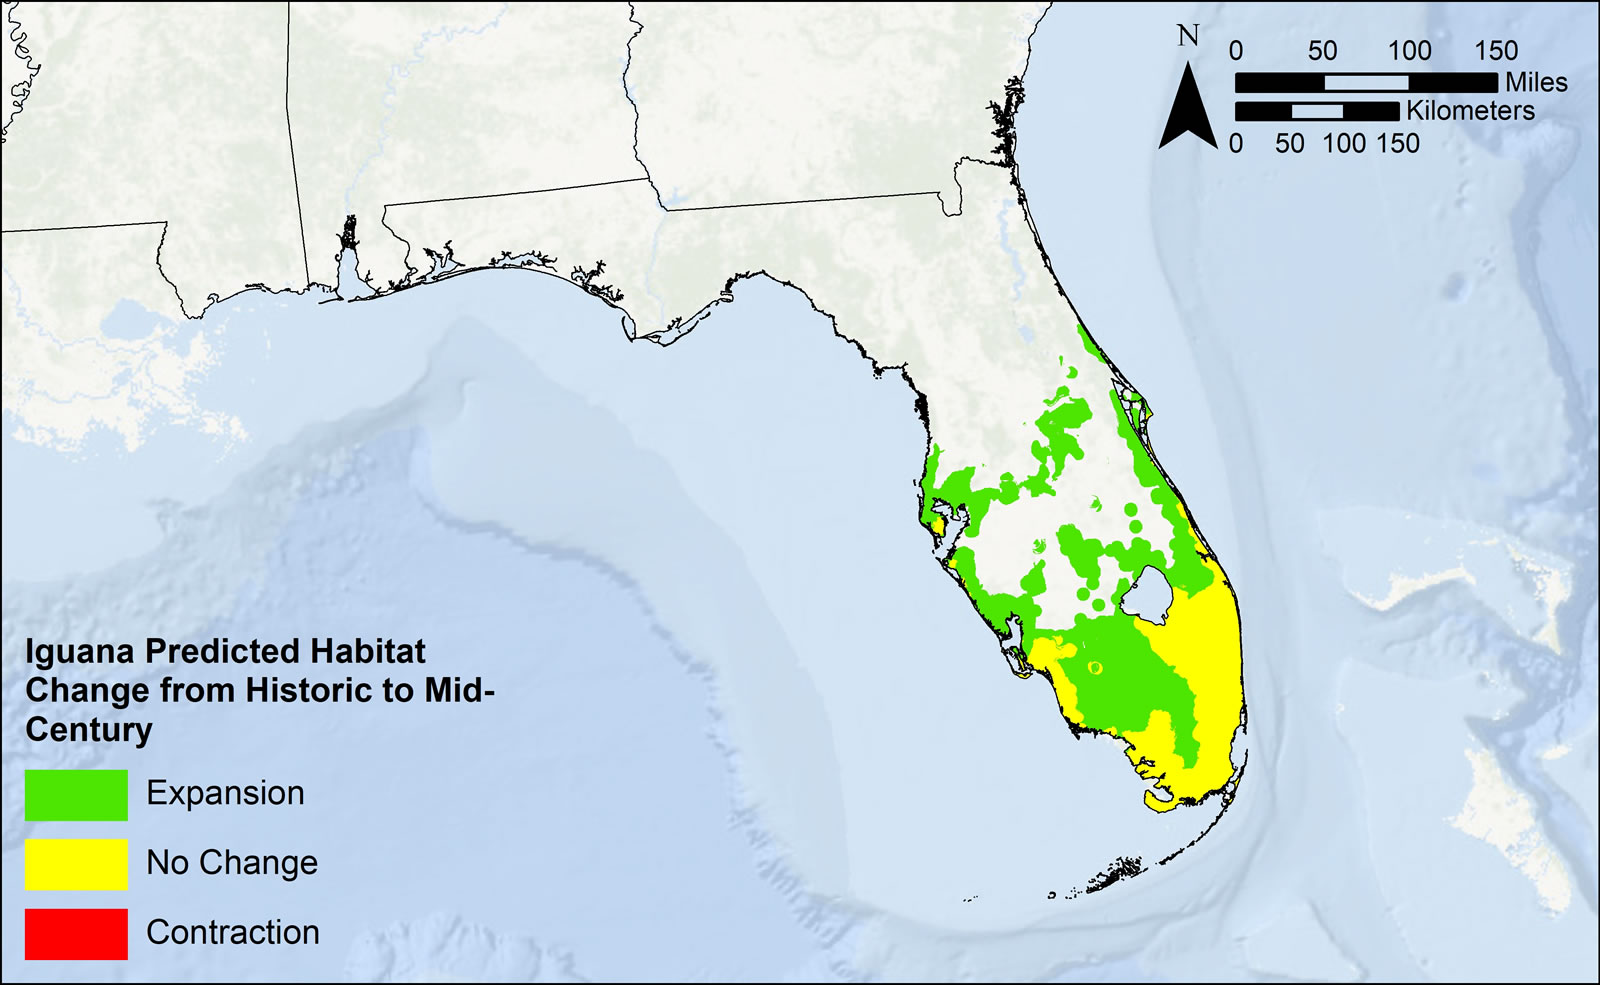 Iguana habitat predicted change from 1995-2004 (“historic”) to 2045-2054 (mid-century) time periods